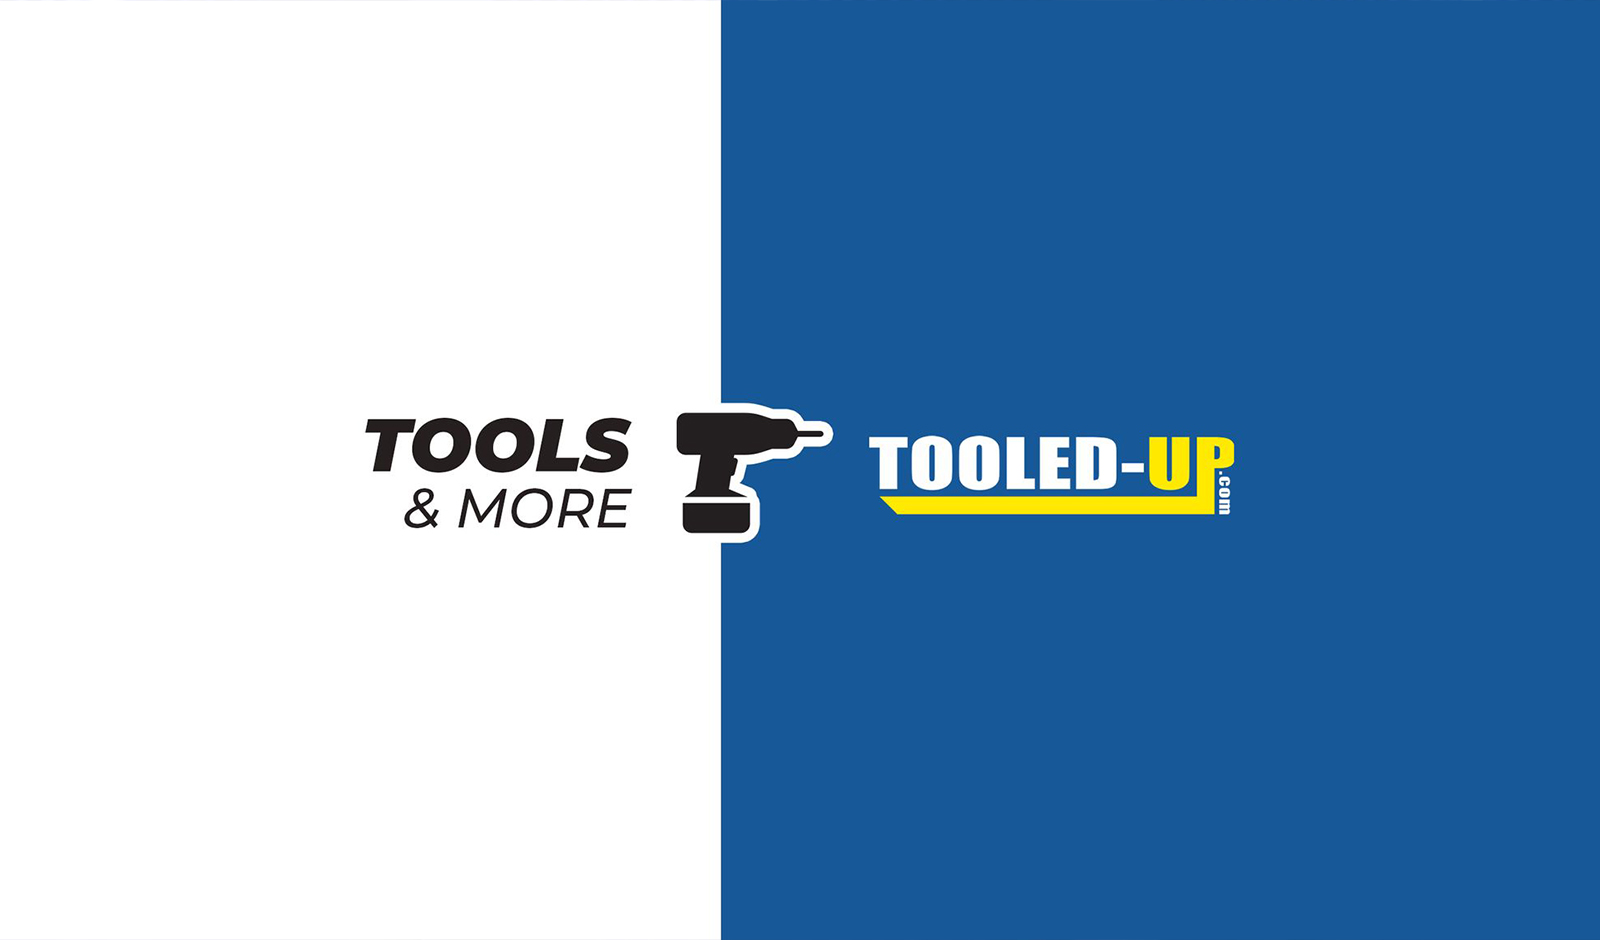 Shop tools and DIY today with Tooled-Up.com